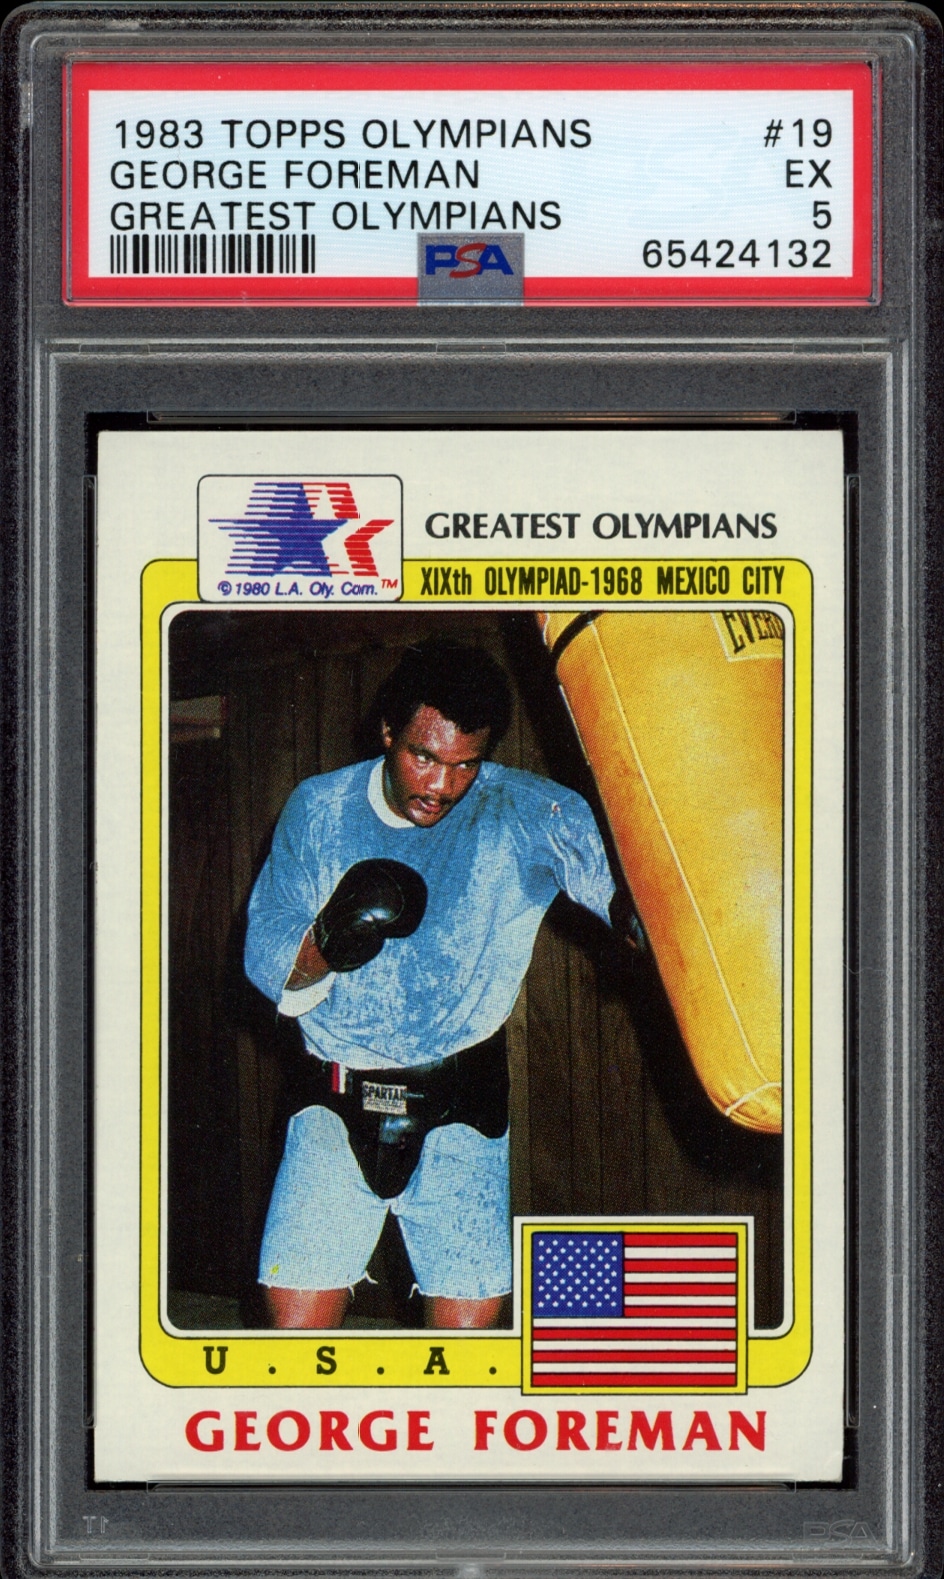 1983 Topps George Foreman Olympian card, PSA graded EX 5, dynamic boxing pose.